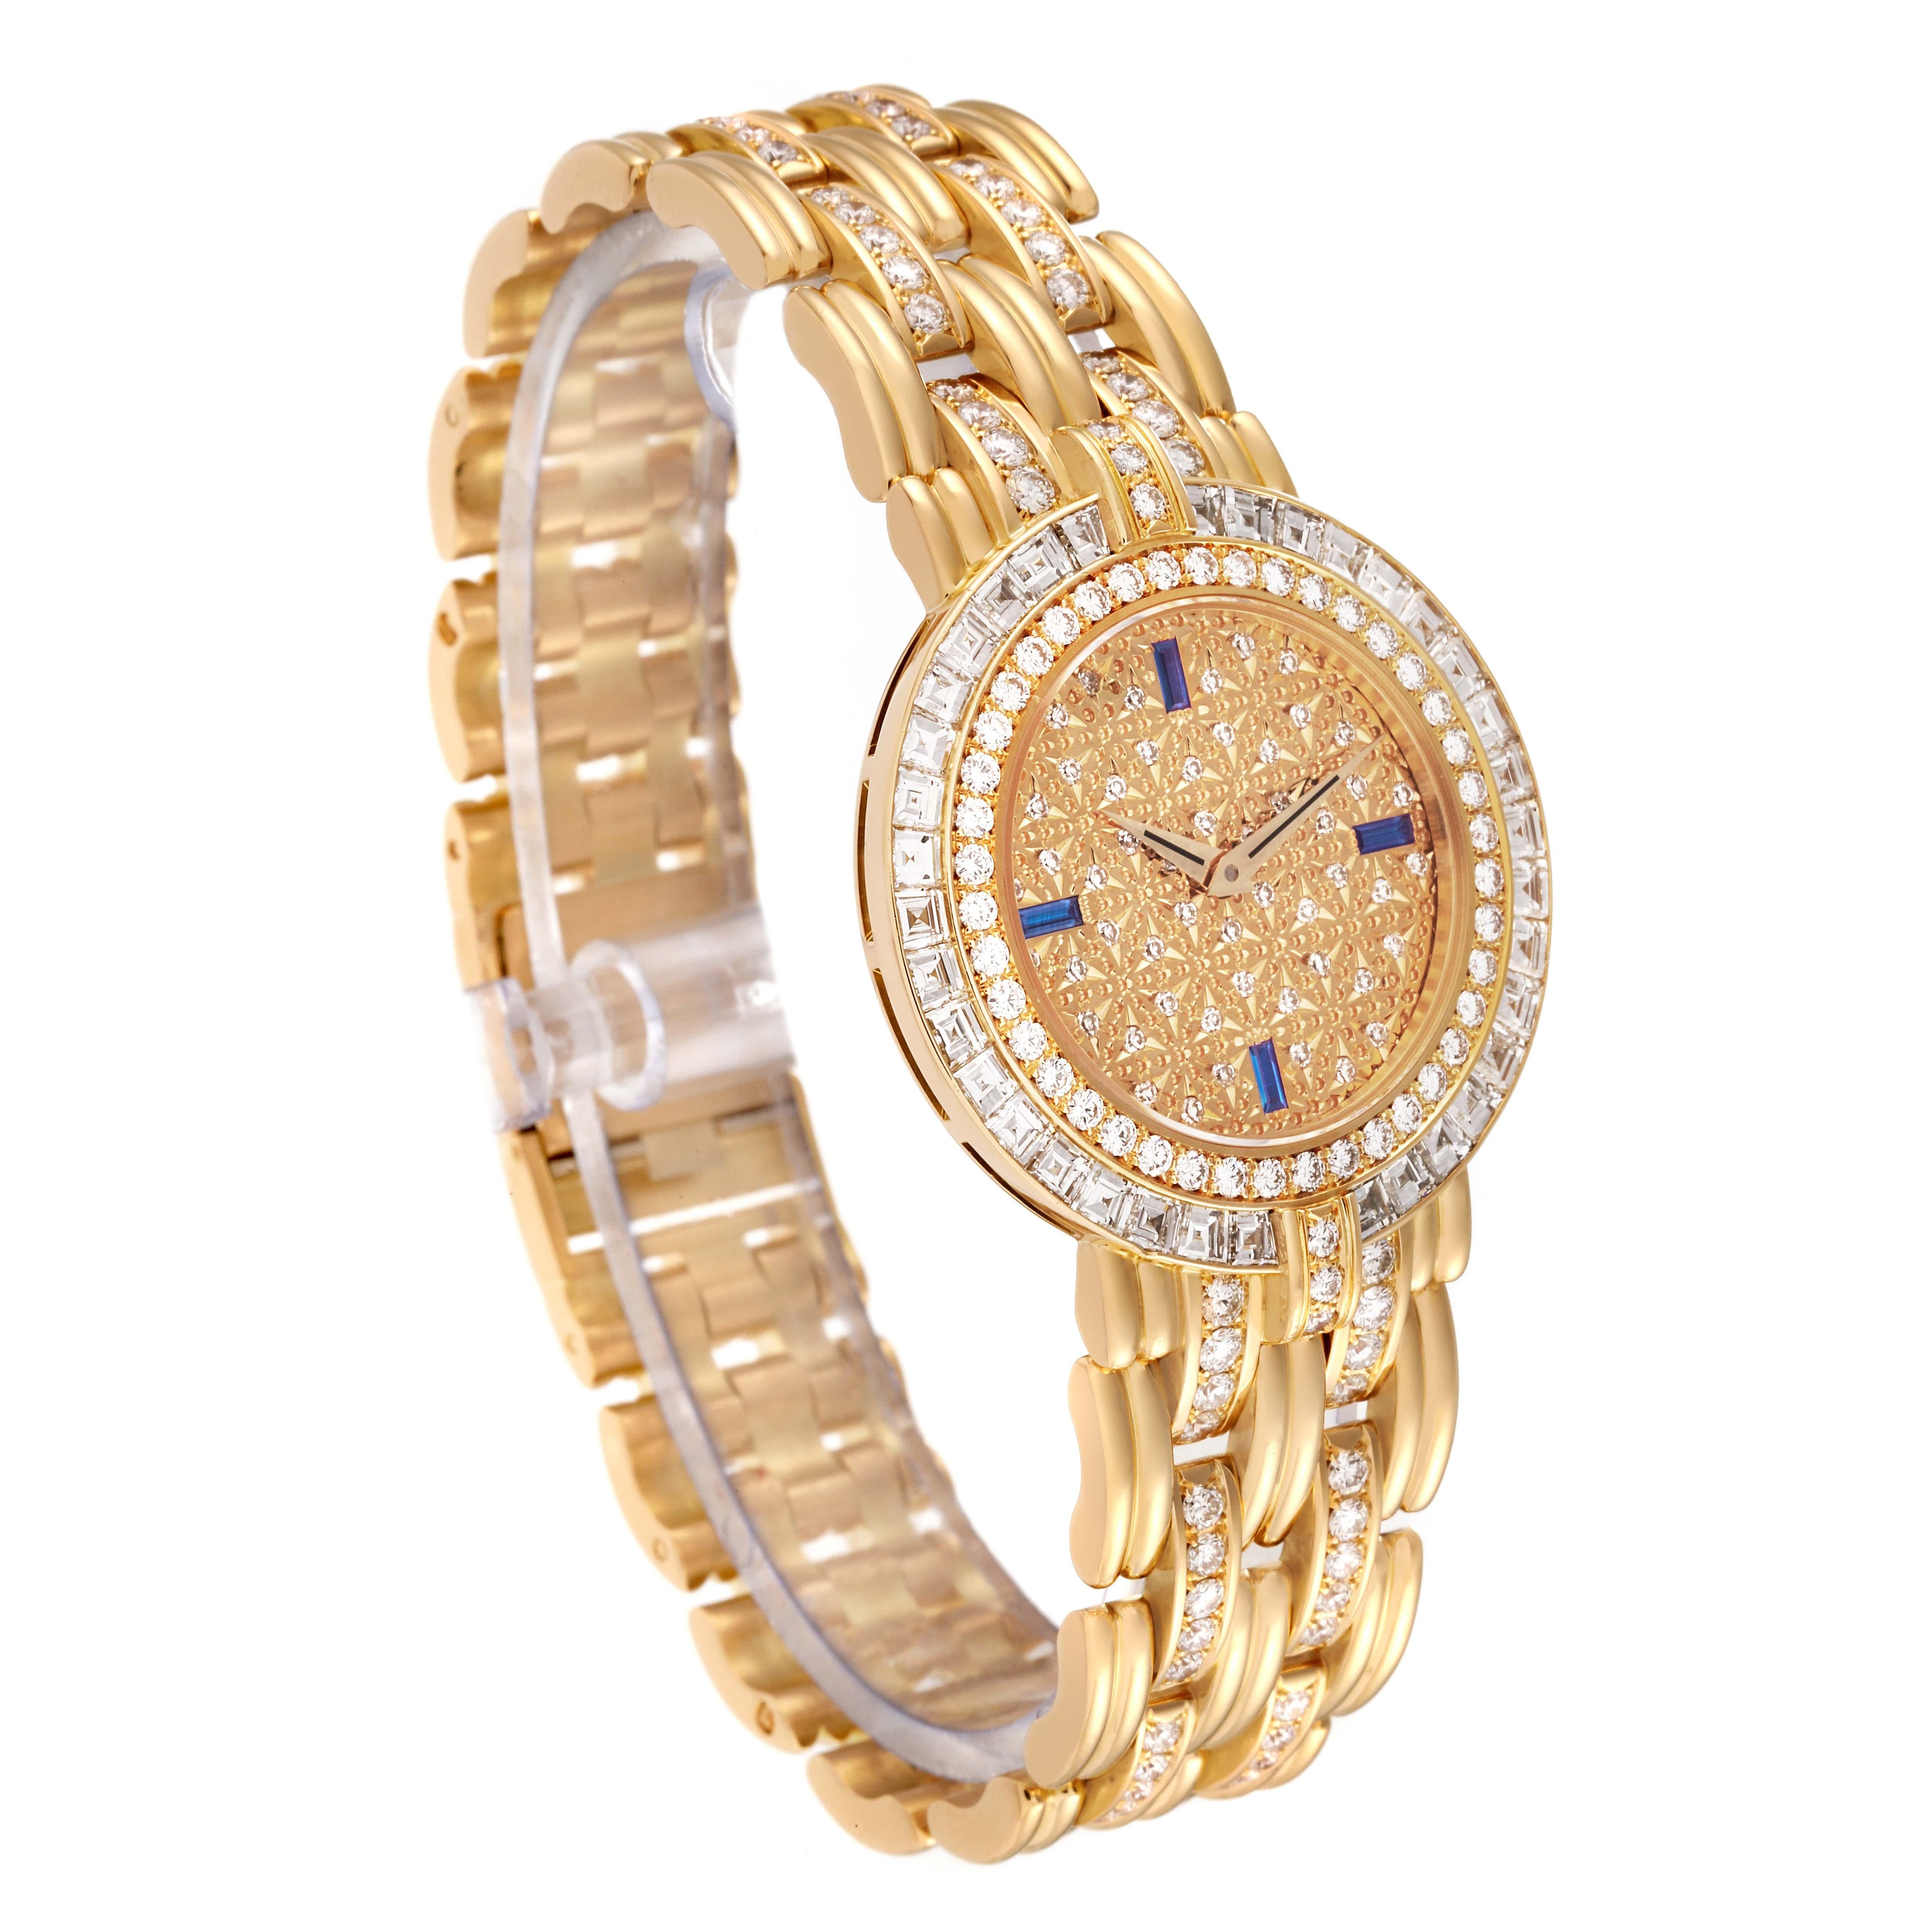 Patek Philippe Yellow Gold Diamond Sapphire Ladies Watch 3982 In Excellent Condition For Sale In Atlanta, GA